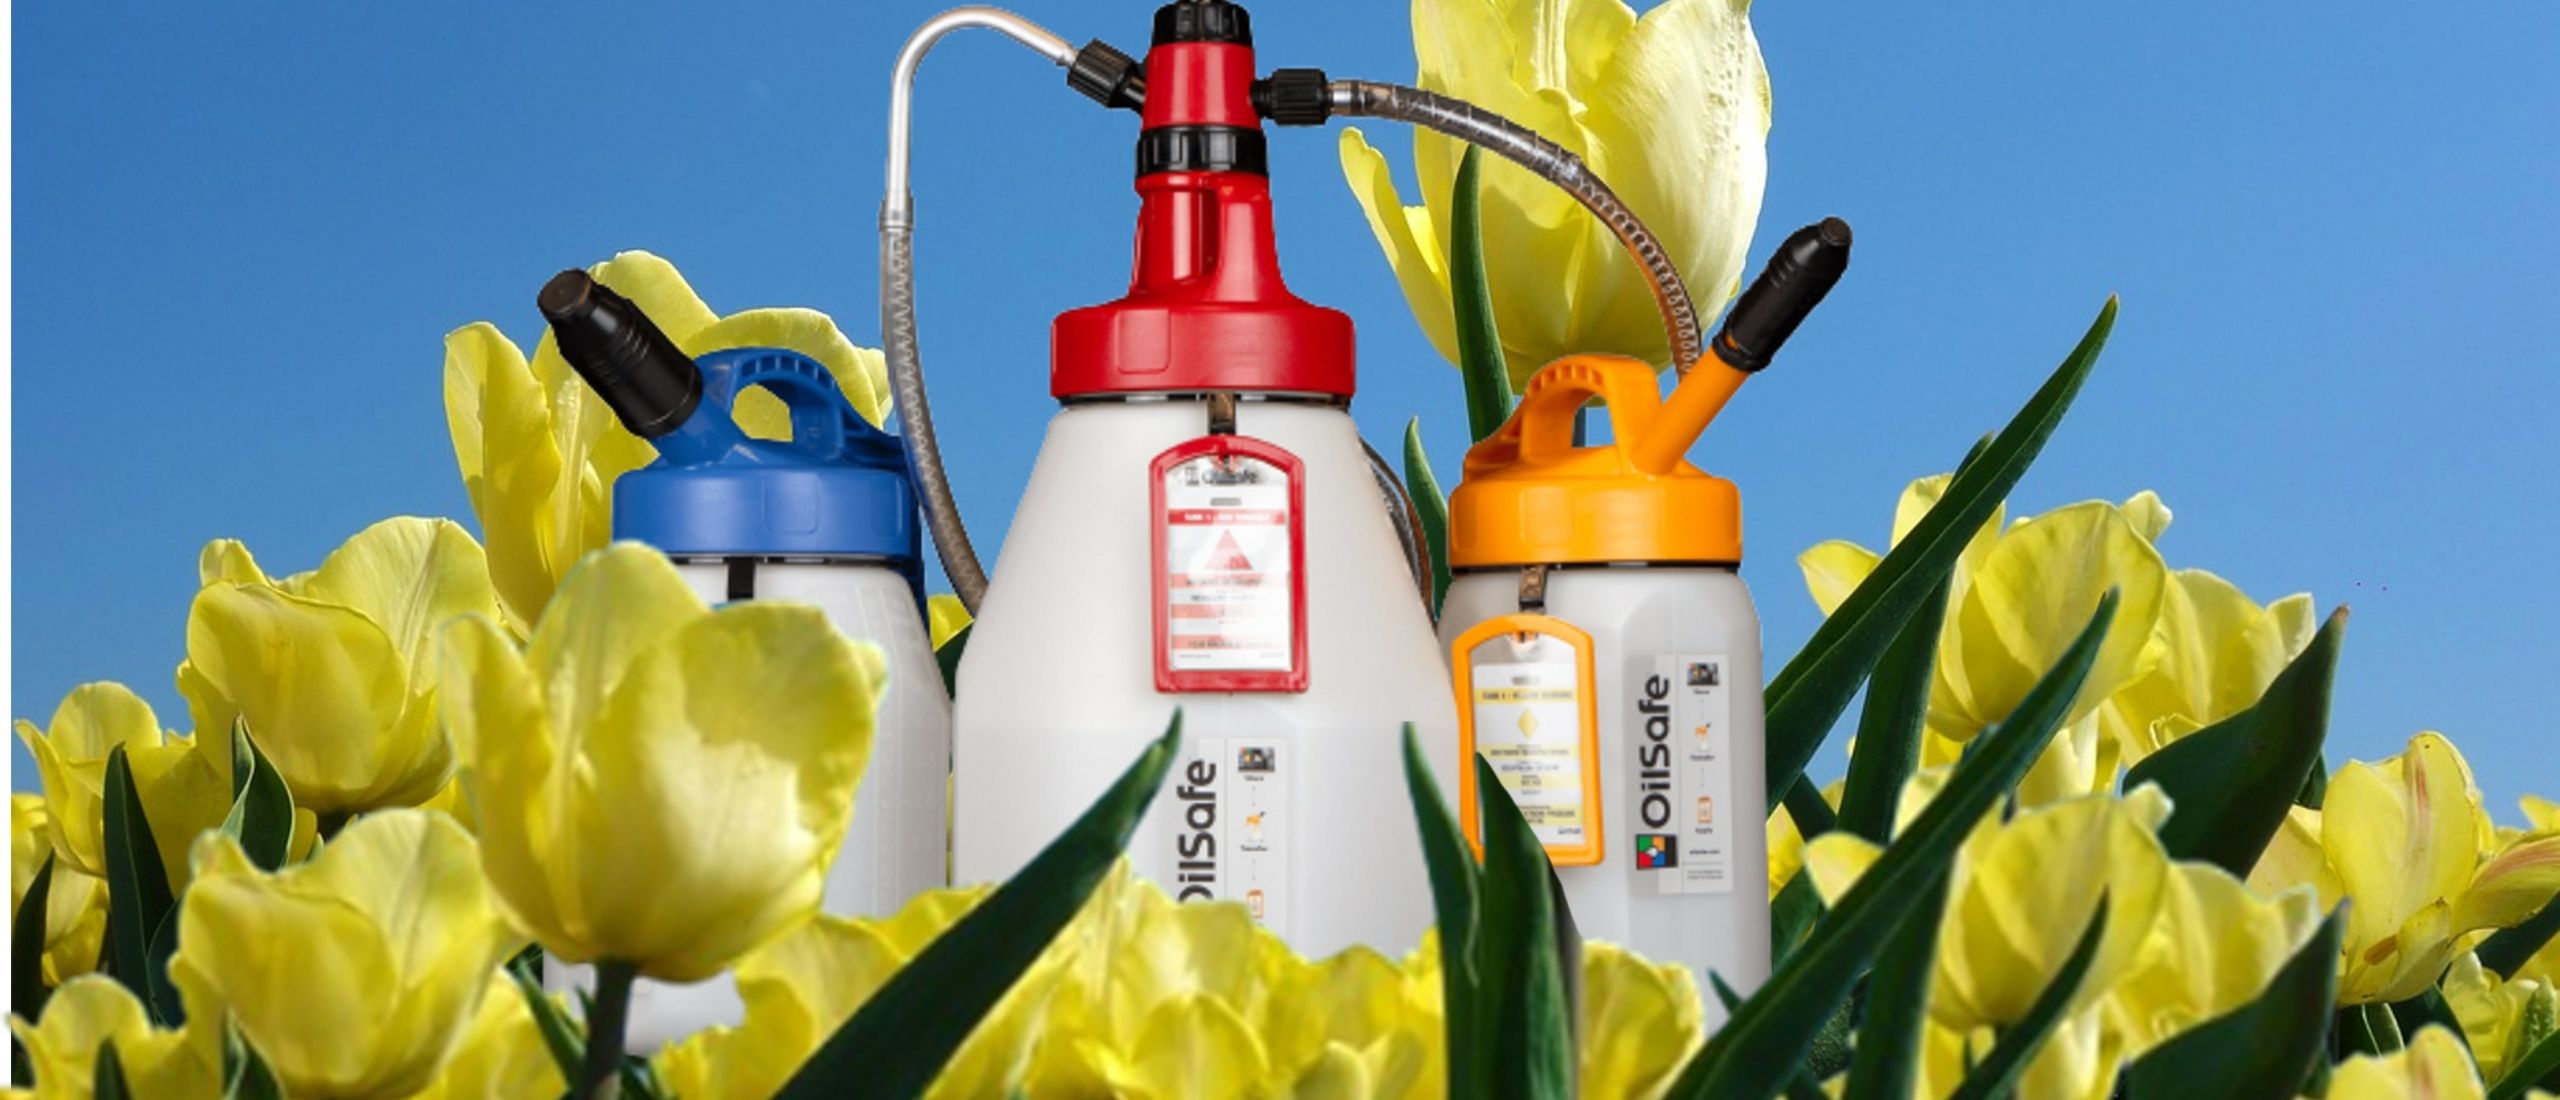 Similarities between Spring and OilSafe